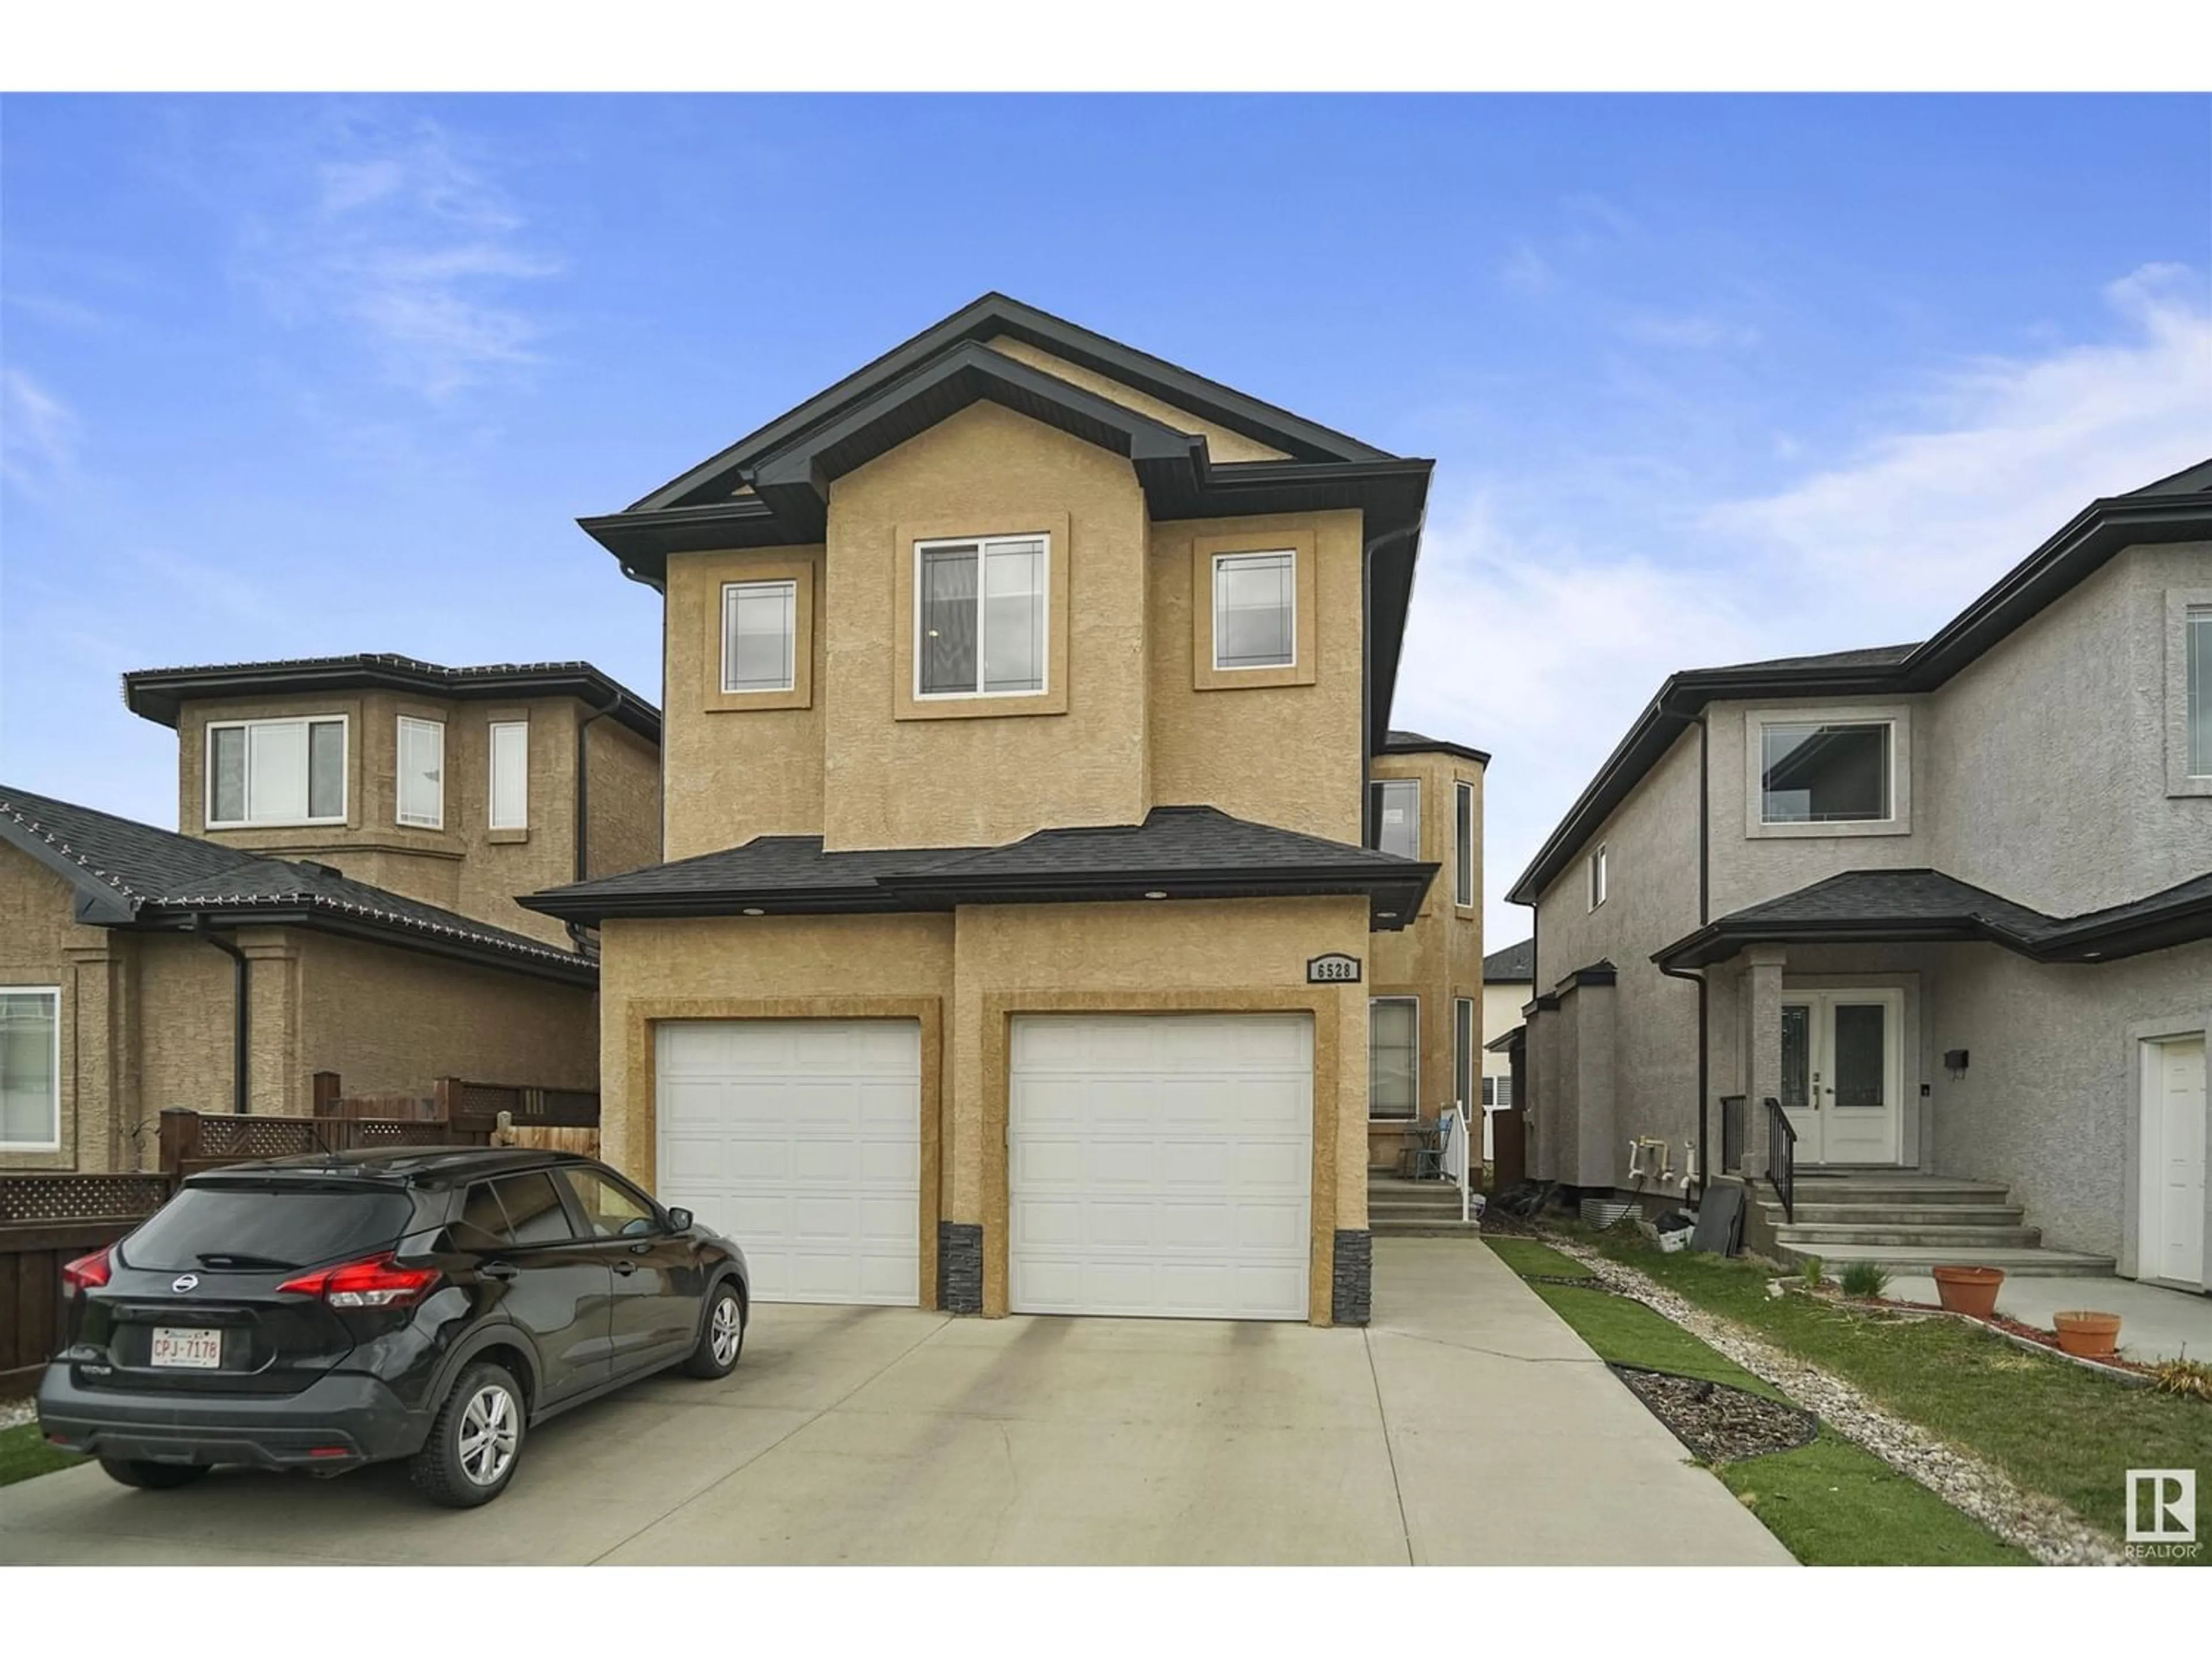 A pic from exterior of the house or condo for 6528 172 AV NW, Edmonton Alberta T5Y3R1